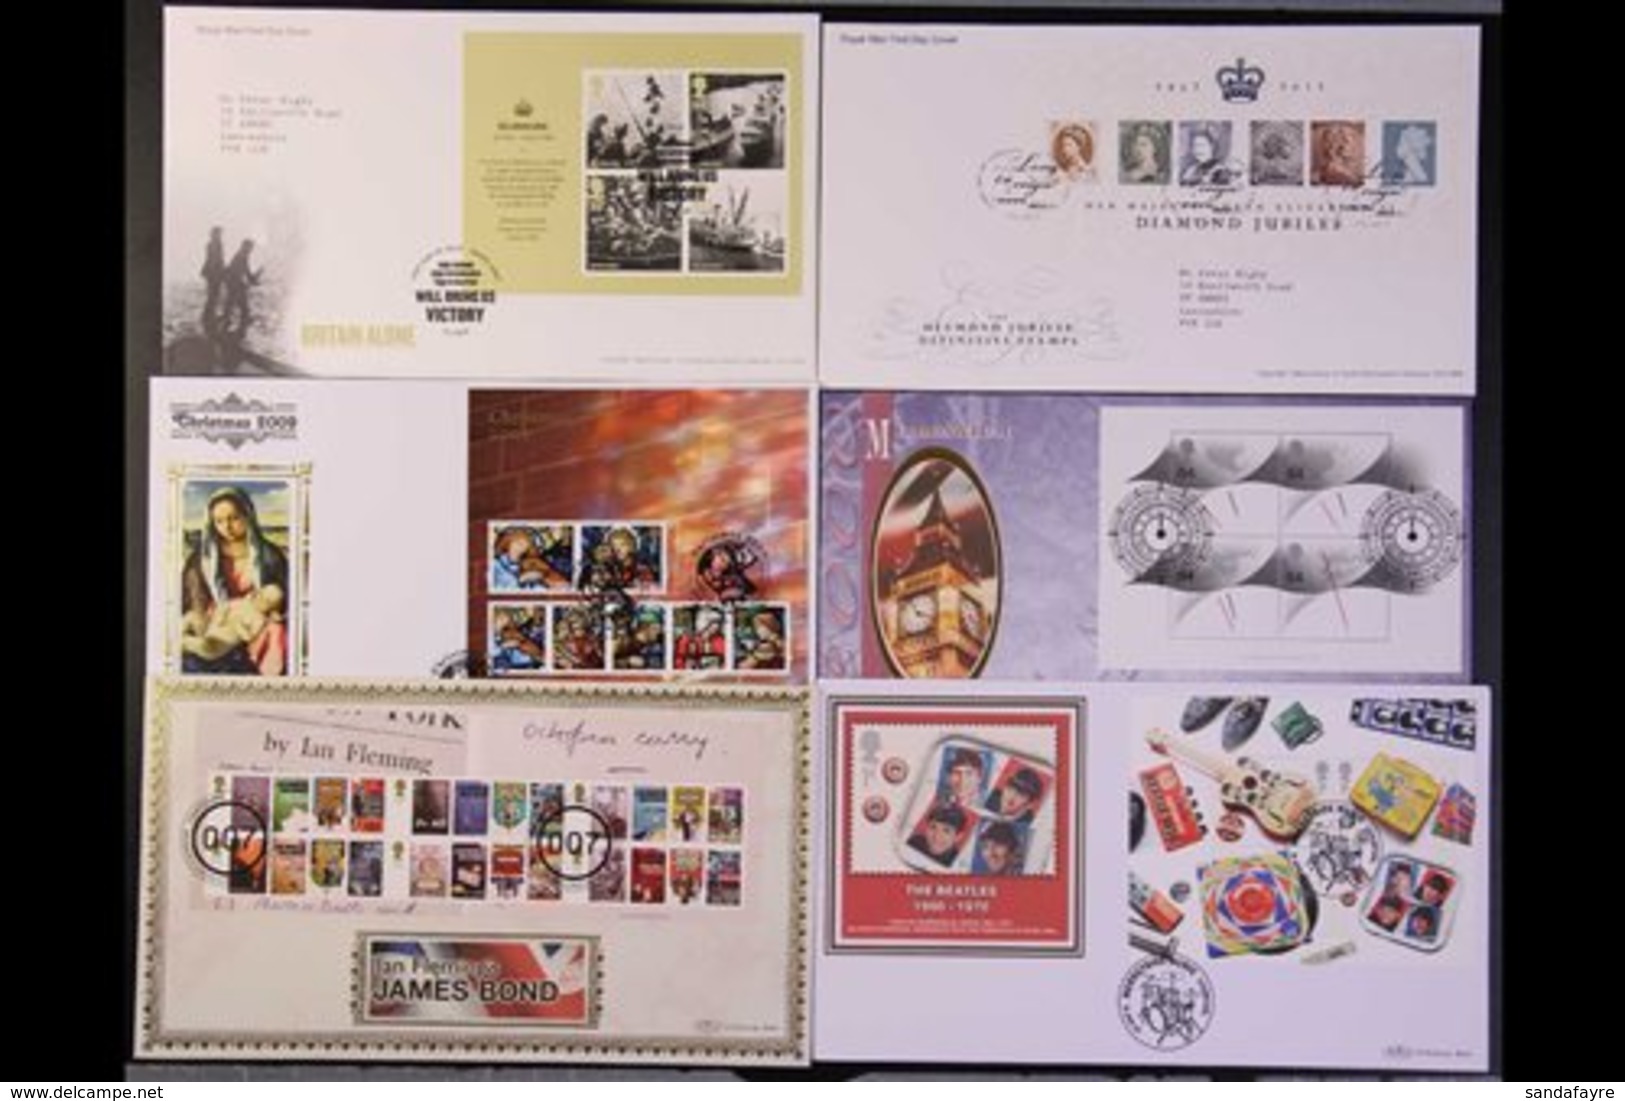 1978-2012 MINIATURE SHEET FDC'S Very Fine All Different Collection Of Royal Mail And "Benham" Limited Edition Covers, We - FDC